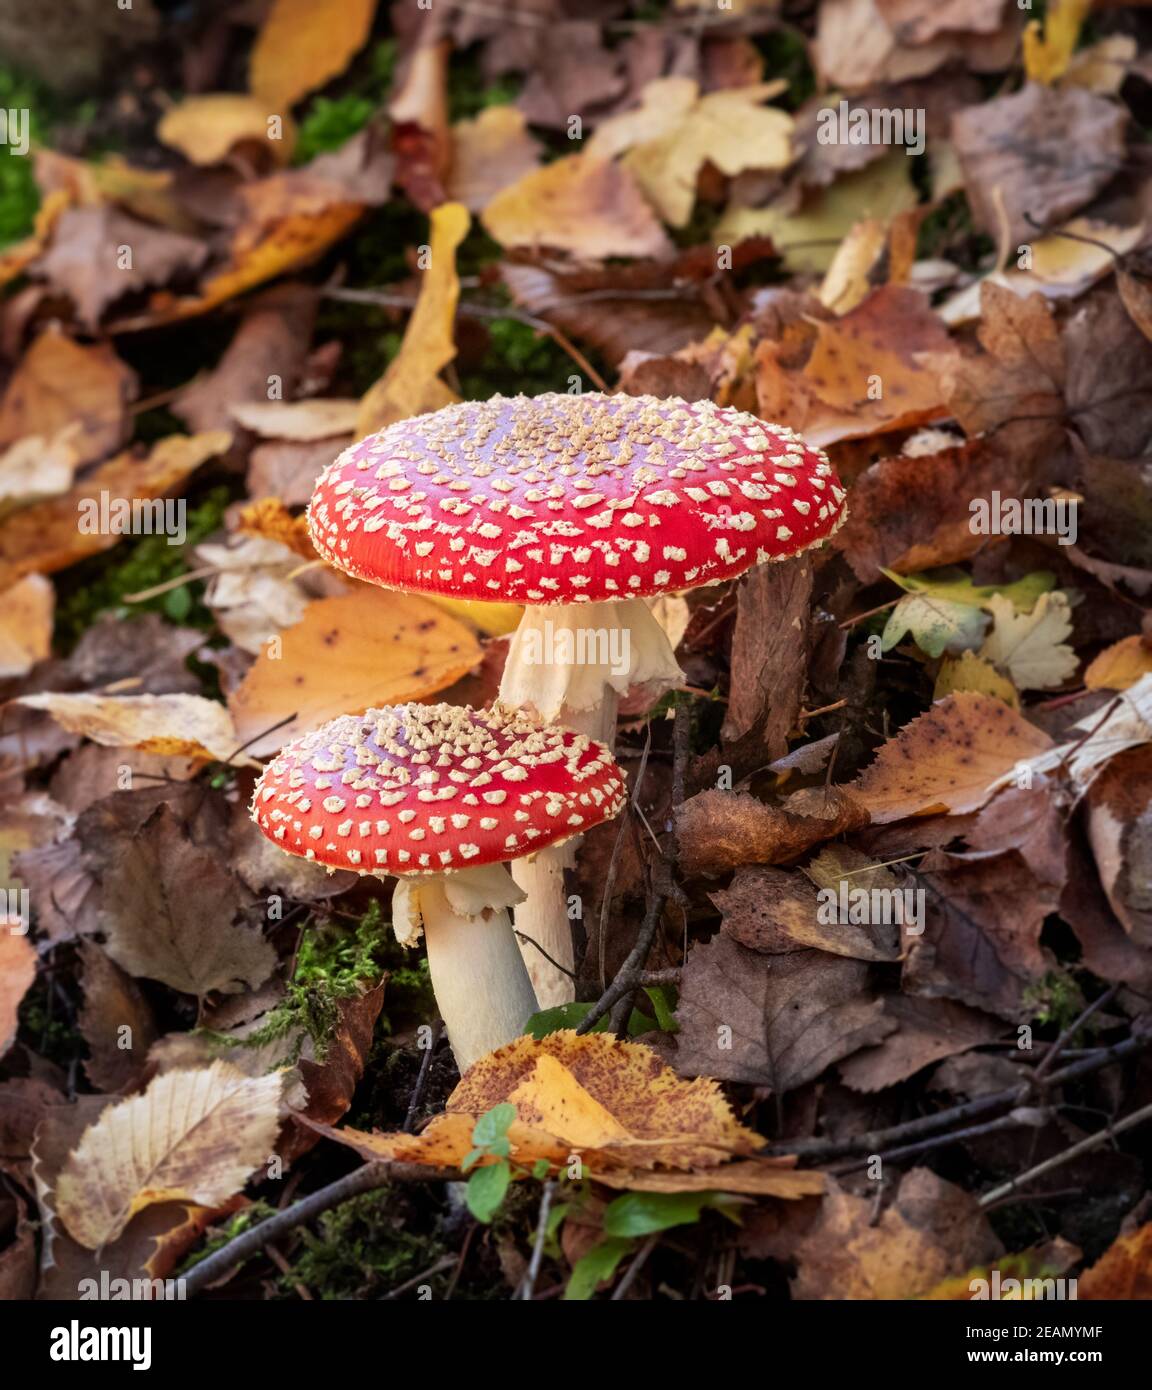 Groupe d'agaric musrooms red fly Banque D'Images